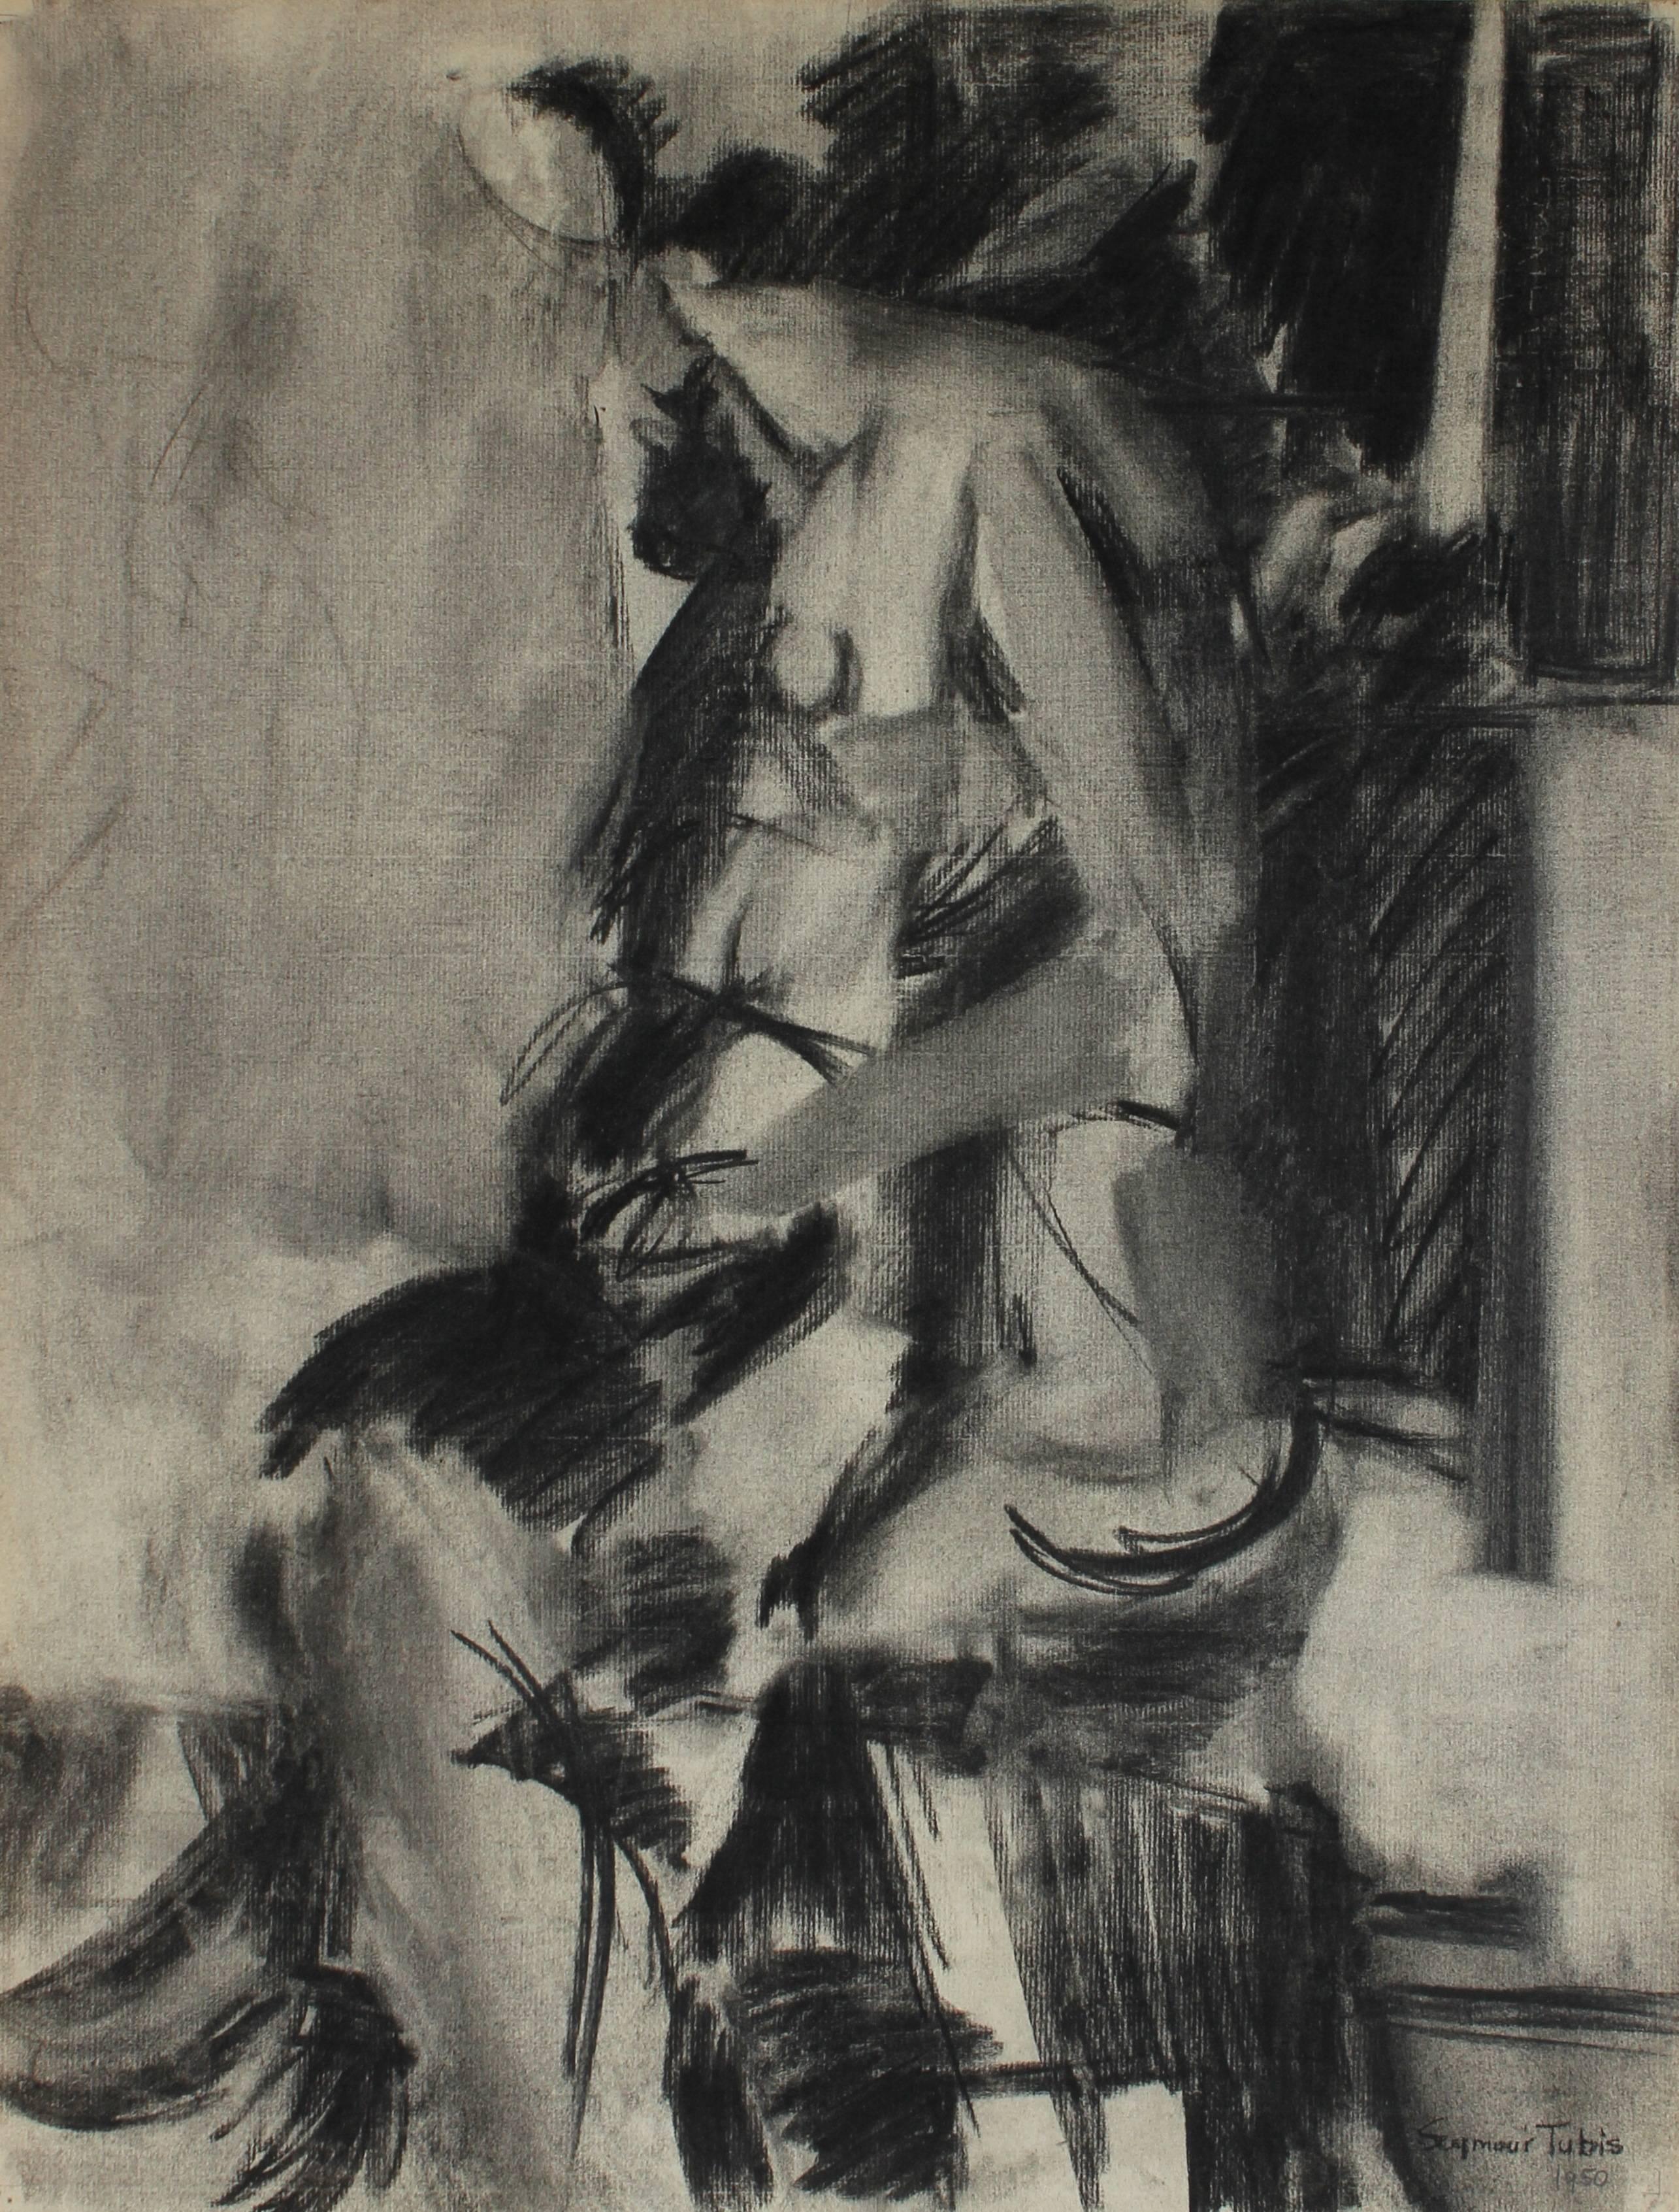 Seymour Tubis Figurative Art - Expressionist Figure Study in Charcoal, 1950